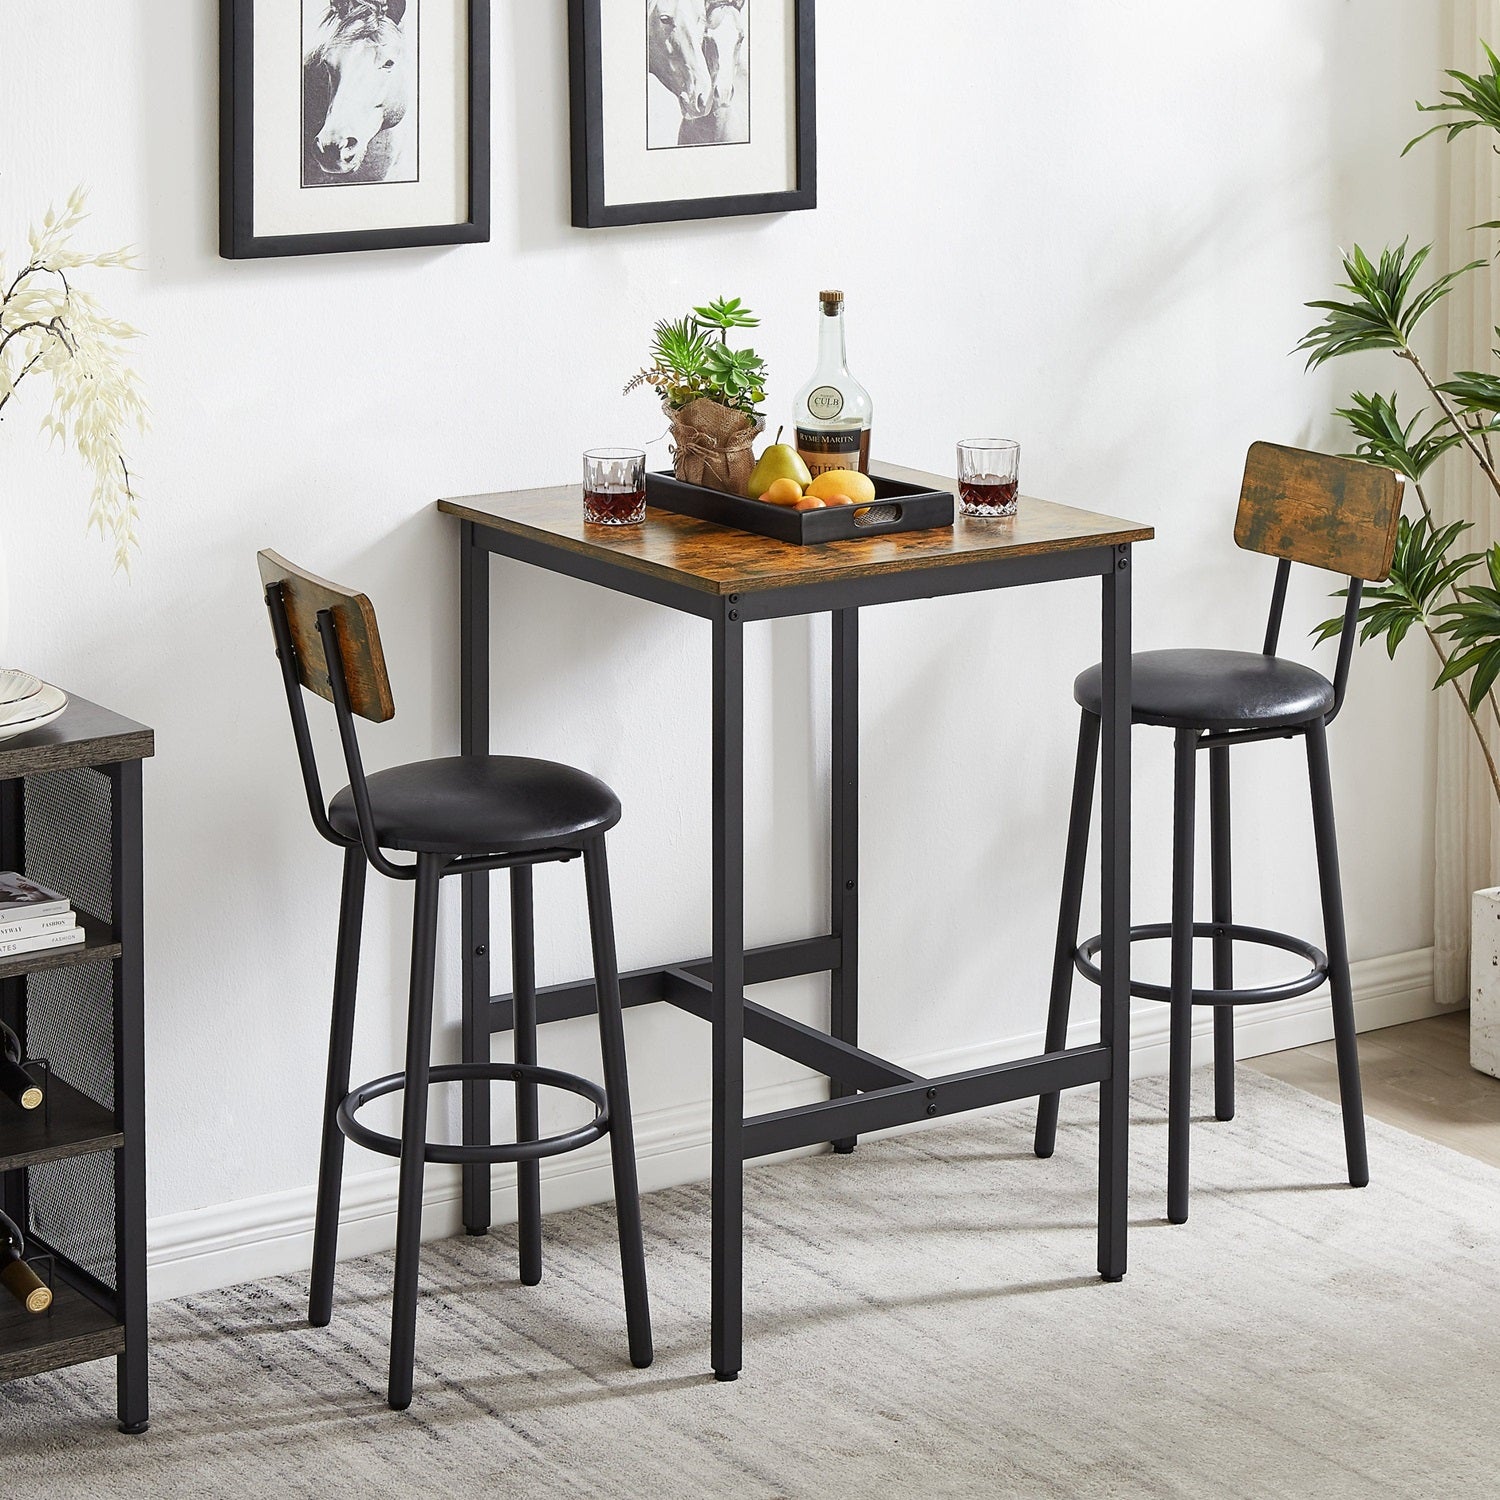 1st Choice Furniture Direct Bar Set 1st Choice Rustic Brown Bar Table Set with 2 Stools and Soft Backrest